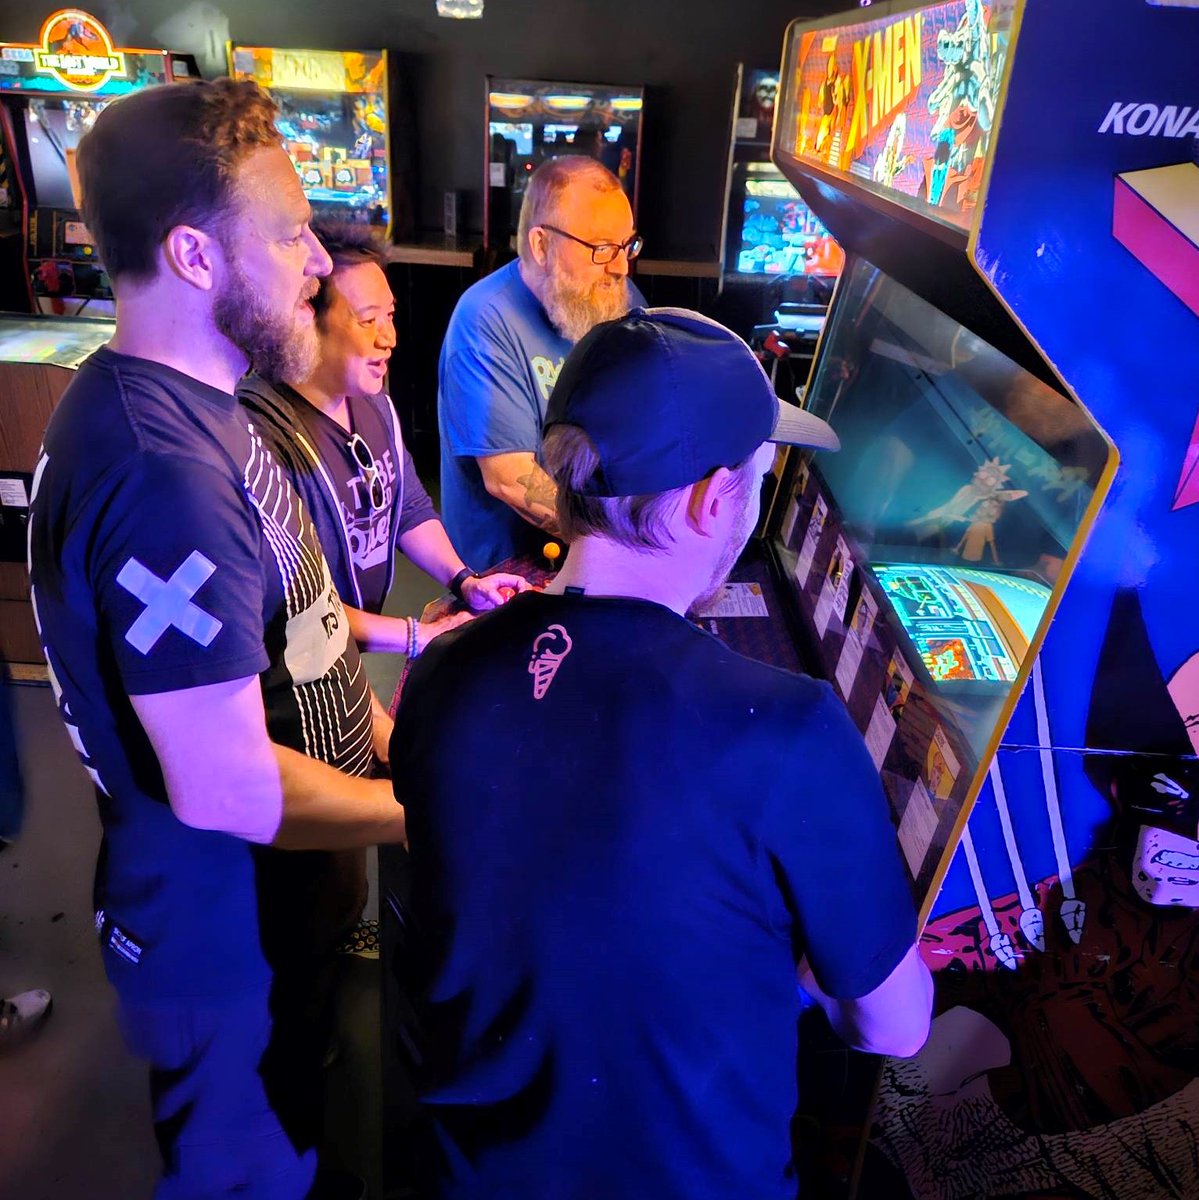 Trebor joined @rossmarquand and @mingchen37
for some arcade games at @updowndsm following Day 2 of @desmoinescon!

#podcast #podcaster #podcasting #IceCreamSunday #Iowa #DesMoines #DesMoinesCon #RossMarquand #MingChen #TheWalkingDead #Avengers #Marvel #ComicBookMen